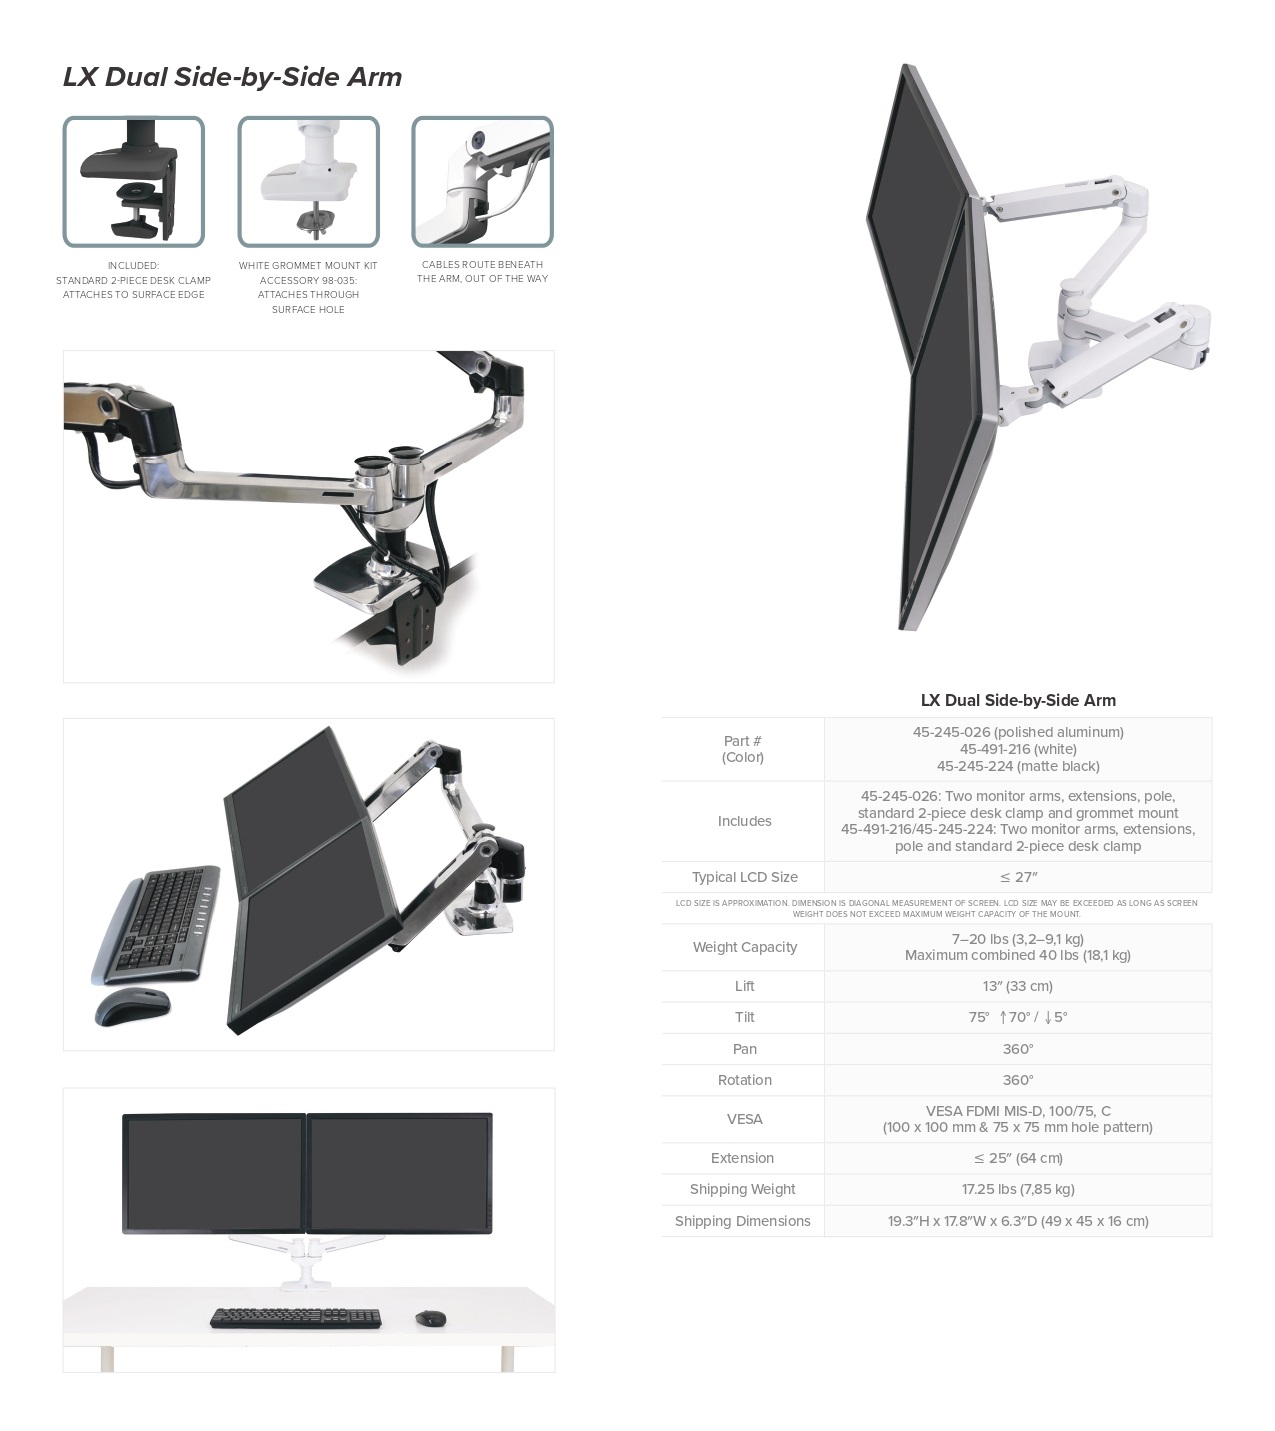 A large marketing image providing additional information about the product Ergotron LX Dual Side-by-Side Arm - Matte Black - Additional alt info not provided